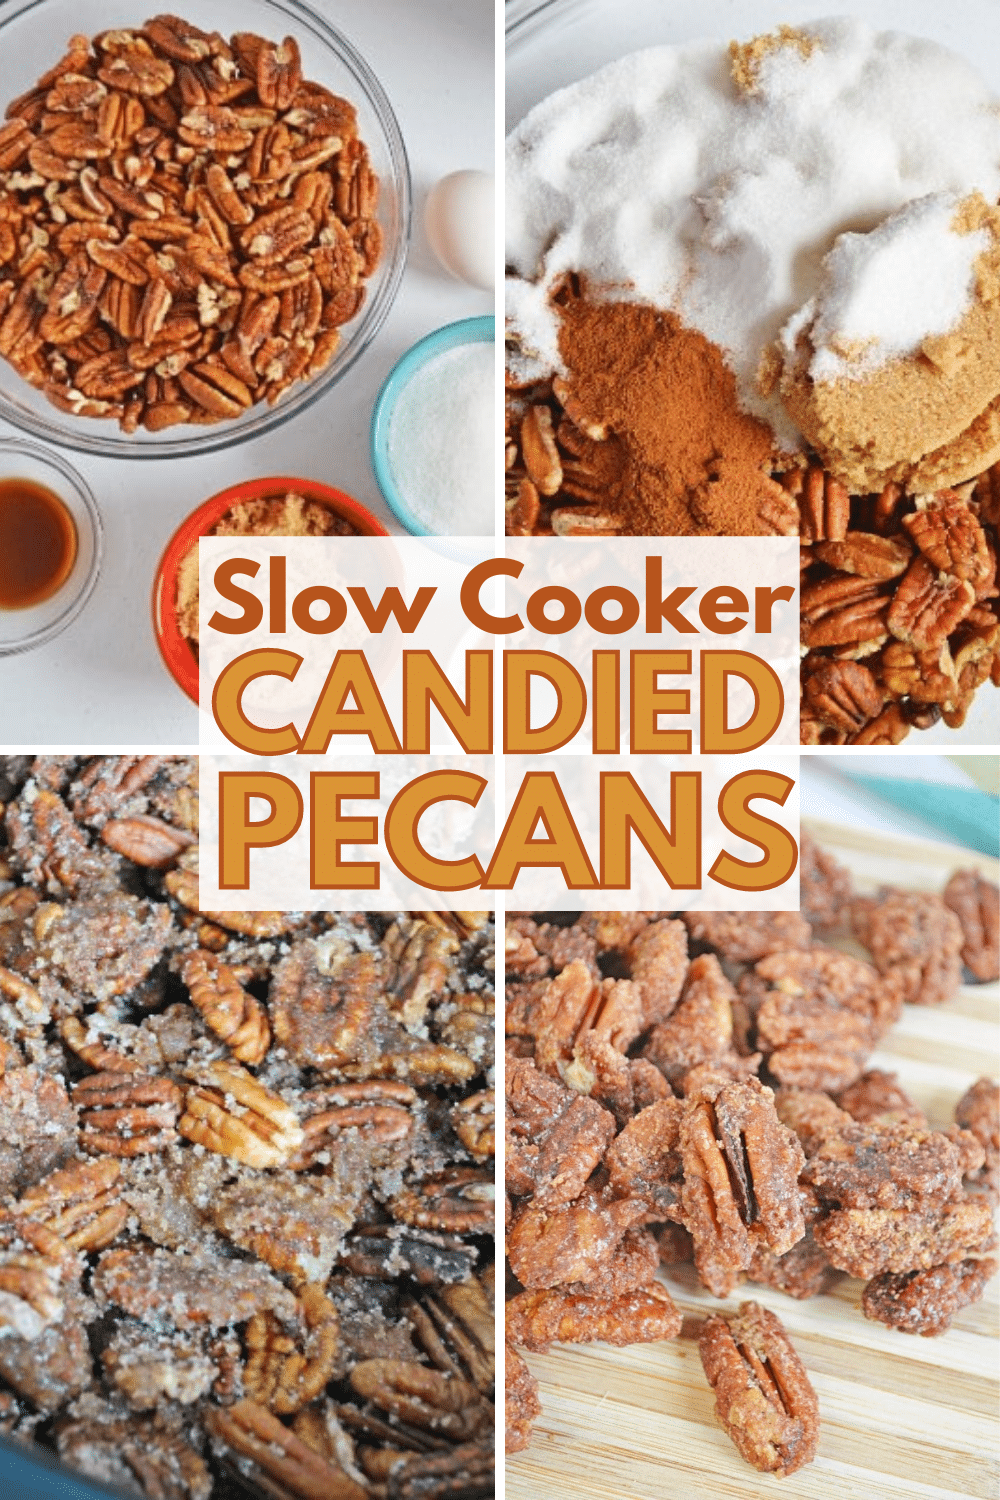 Slow Cooker Candied Pecans: A delicious treat made by slowly cooking pecans in a slow cooker, resulting in perfectly sweet and crunchy candied nuts.